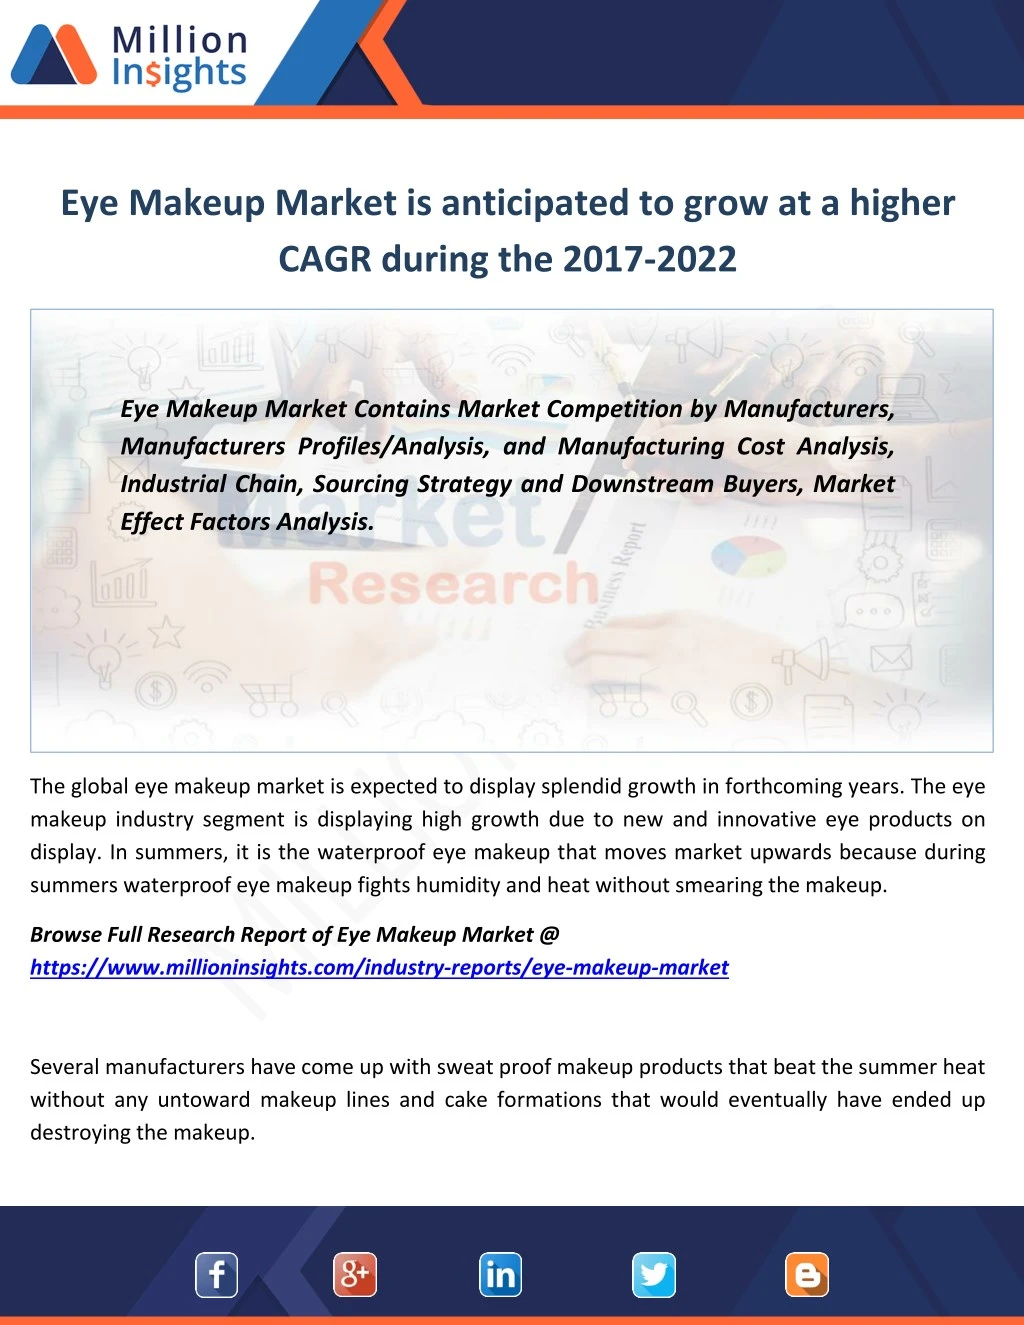 eye makeup market is anticipated to grow